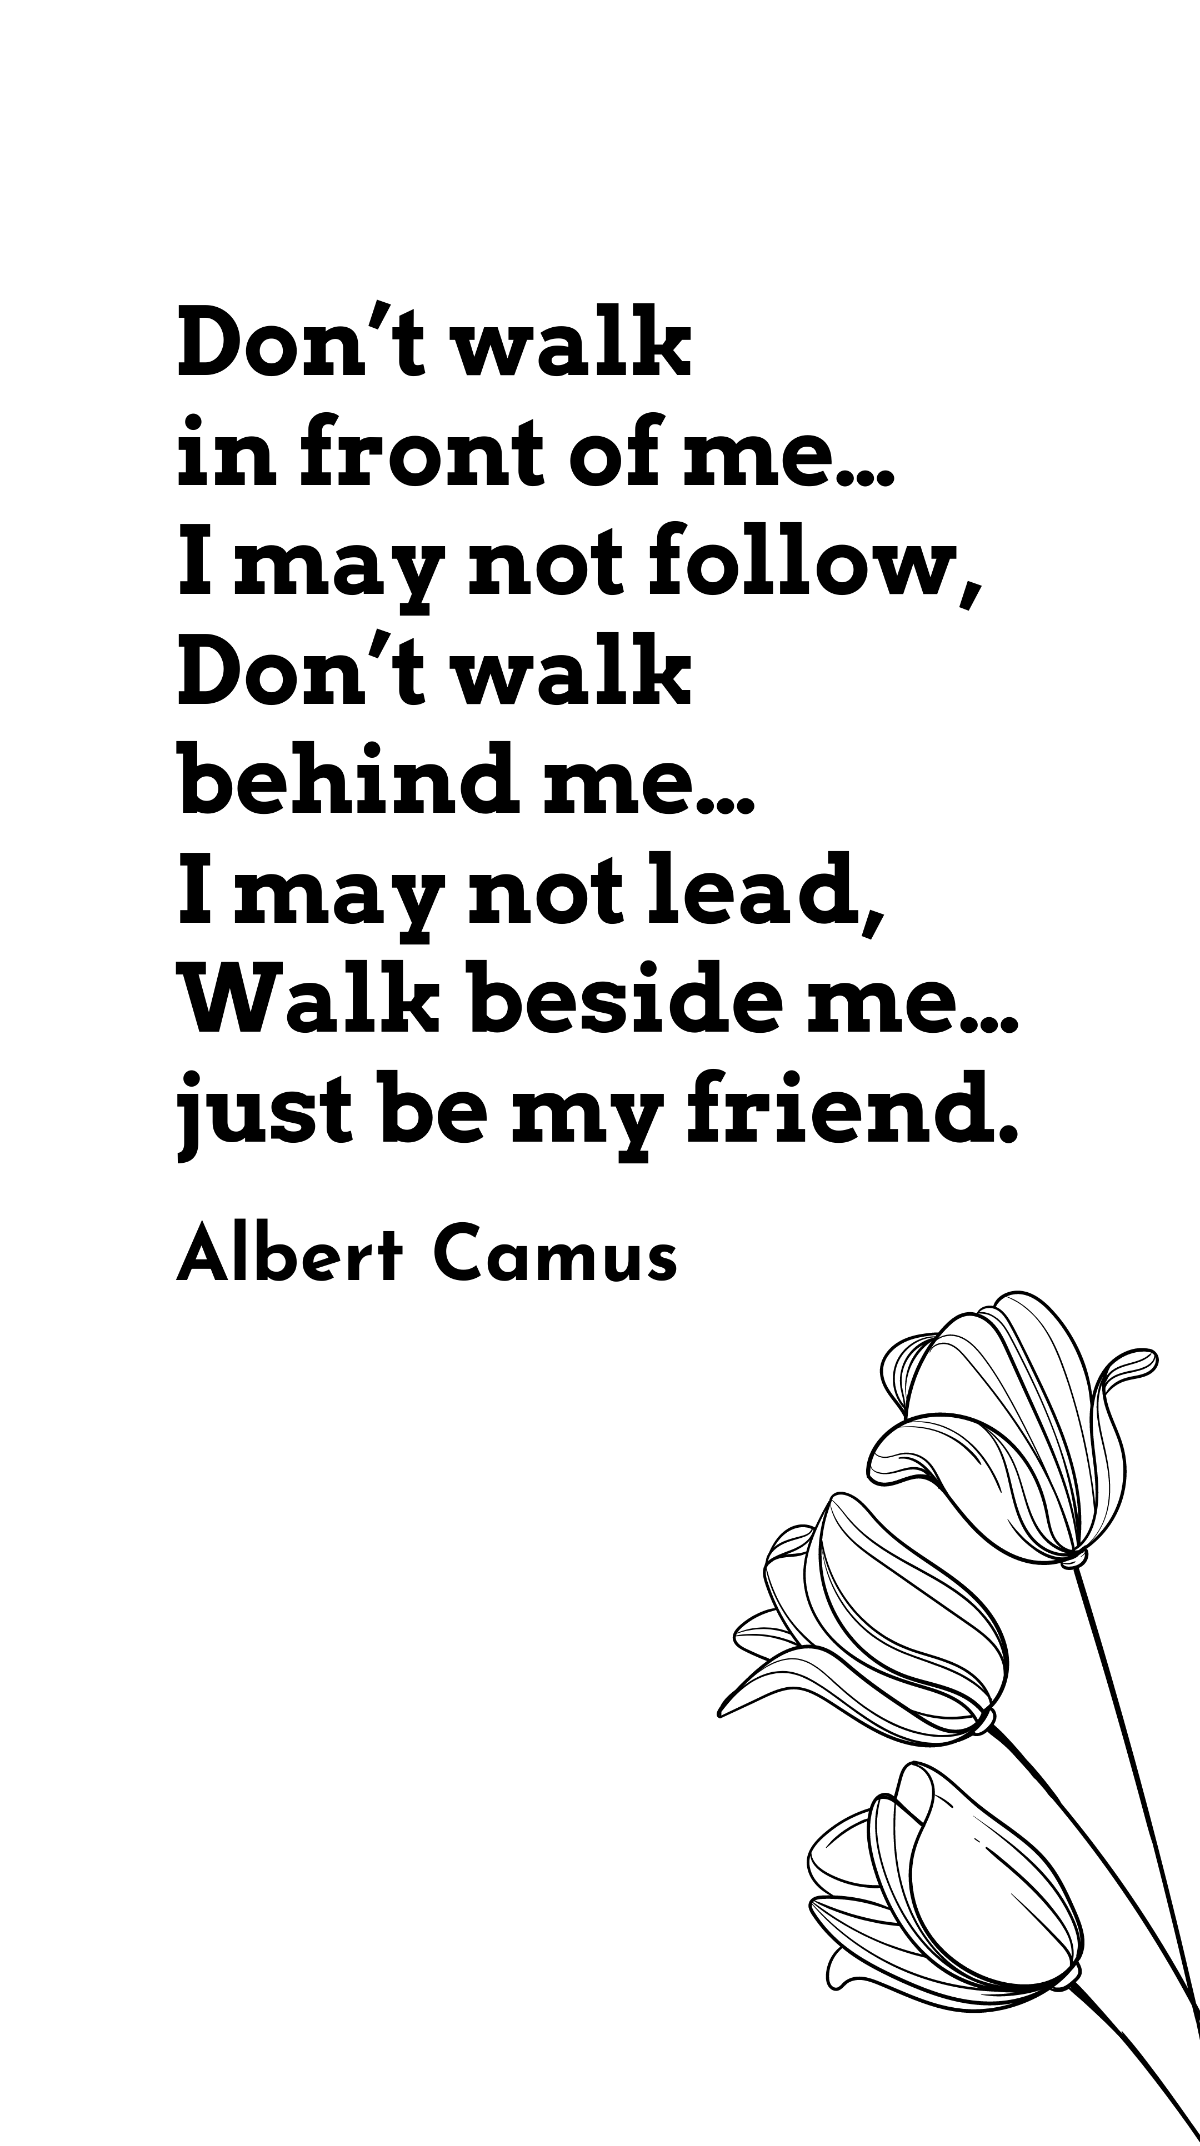 Albert Camus - Don’t walk in front of me… I may not follow, Don’t walk behind me… I may not lead, Walk beside me… just be my friend Template